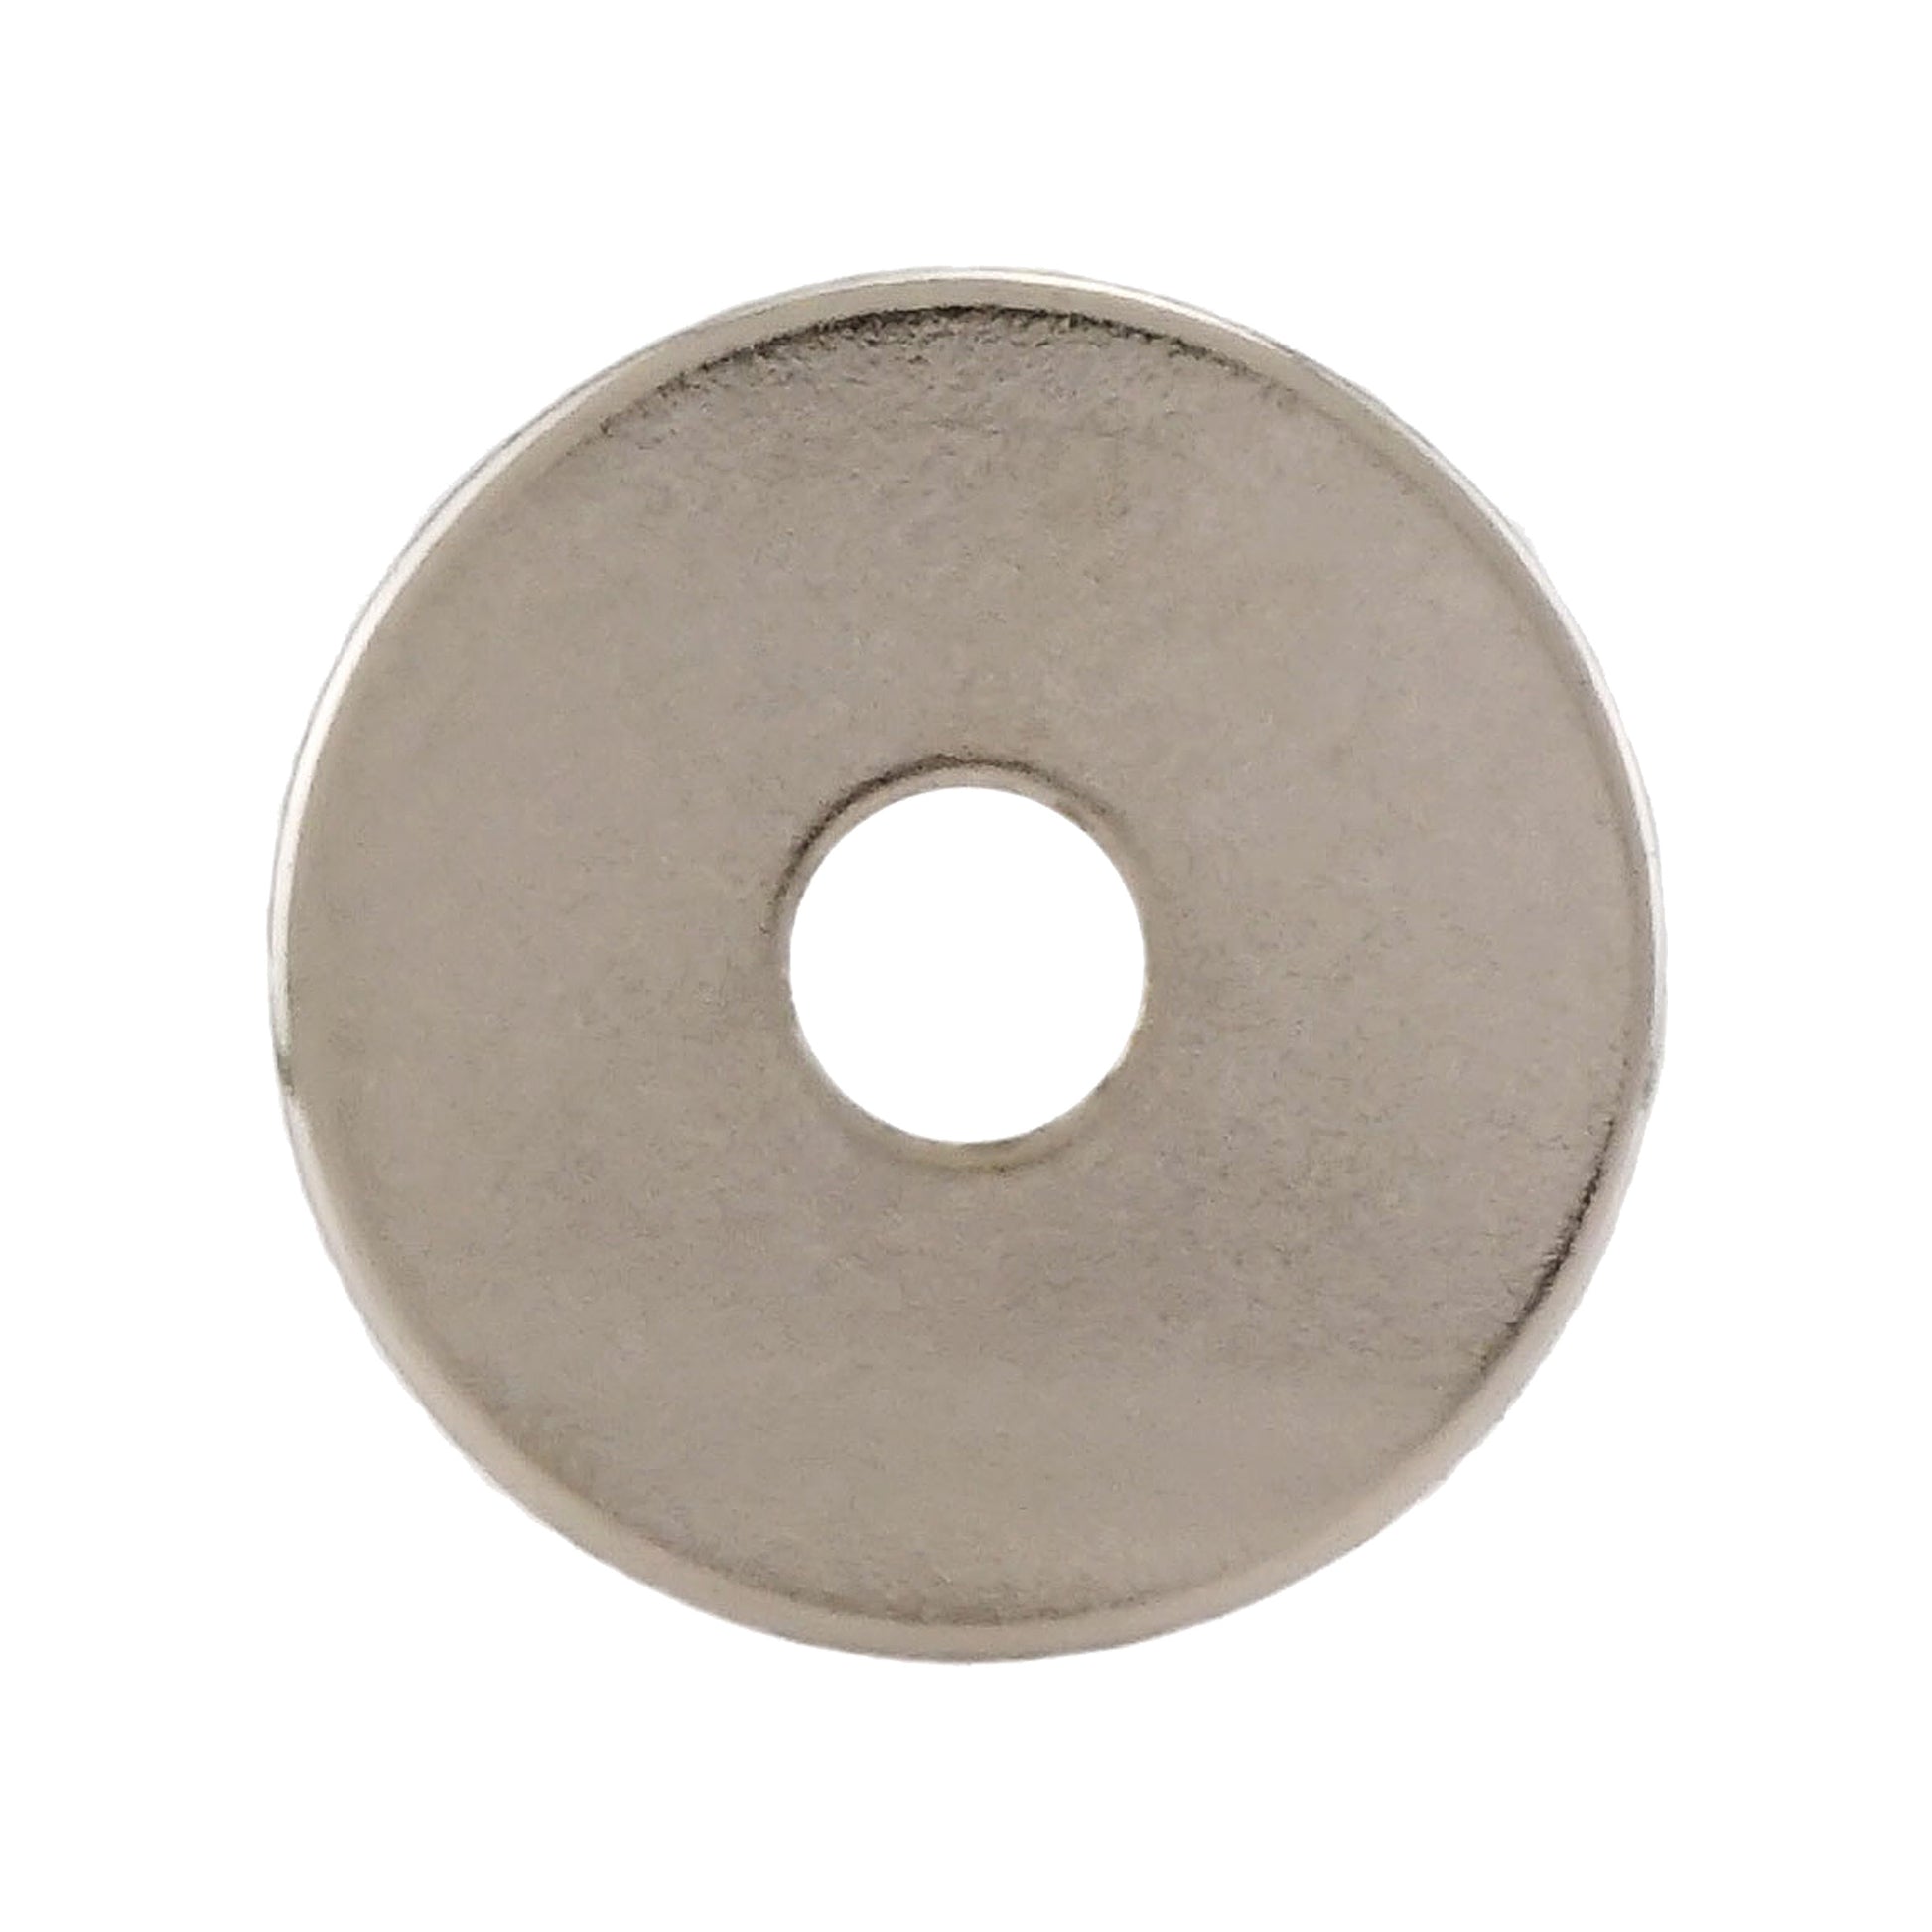 Load image into Gallery viewer, NR010023N Neodymium Ring Magnet - Top View